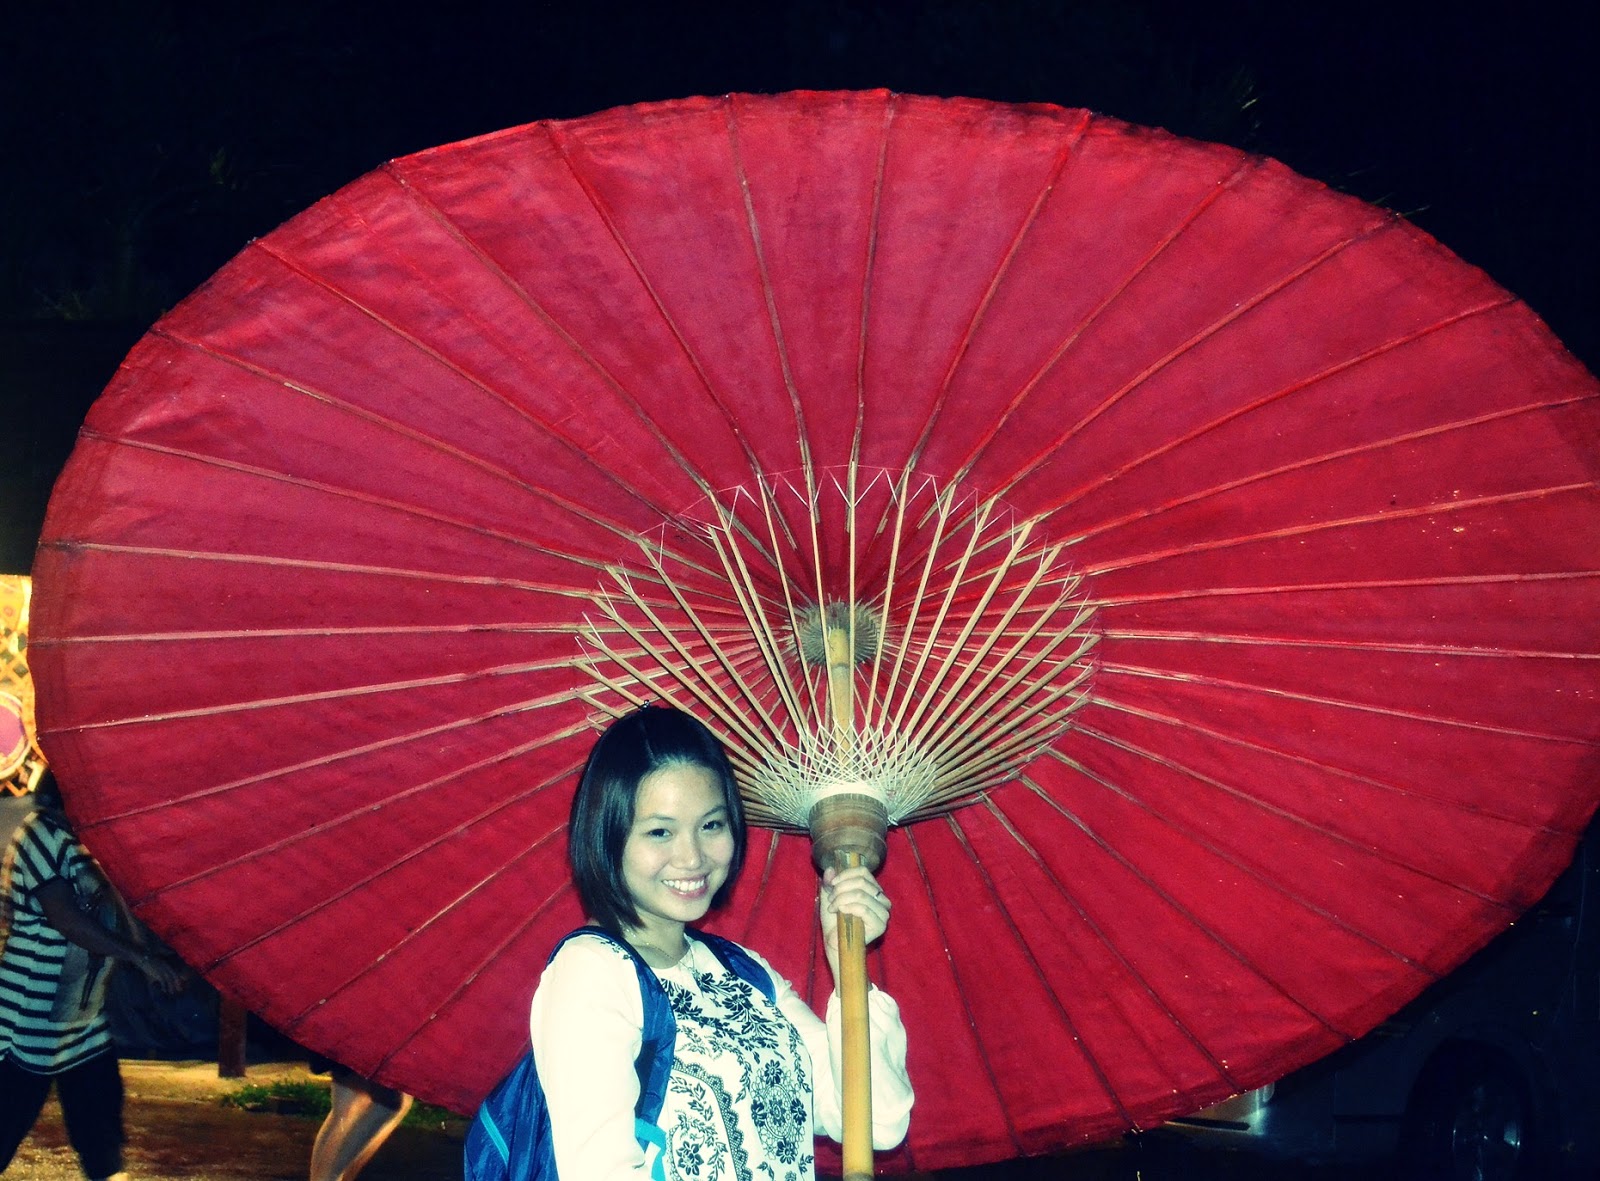 Specialty of Chiang Mai ; the big umbrella made from local paper)